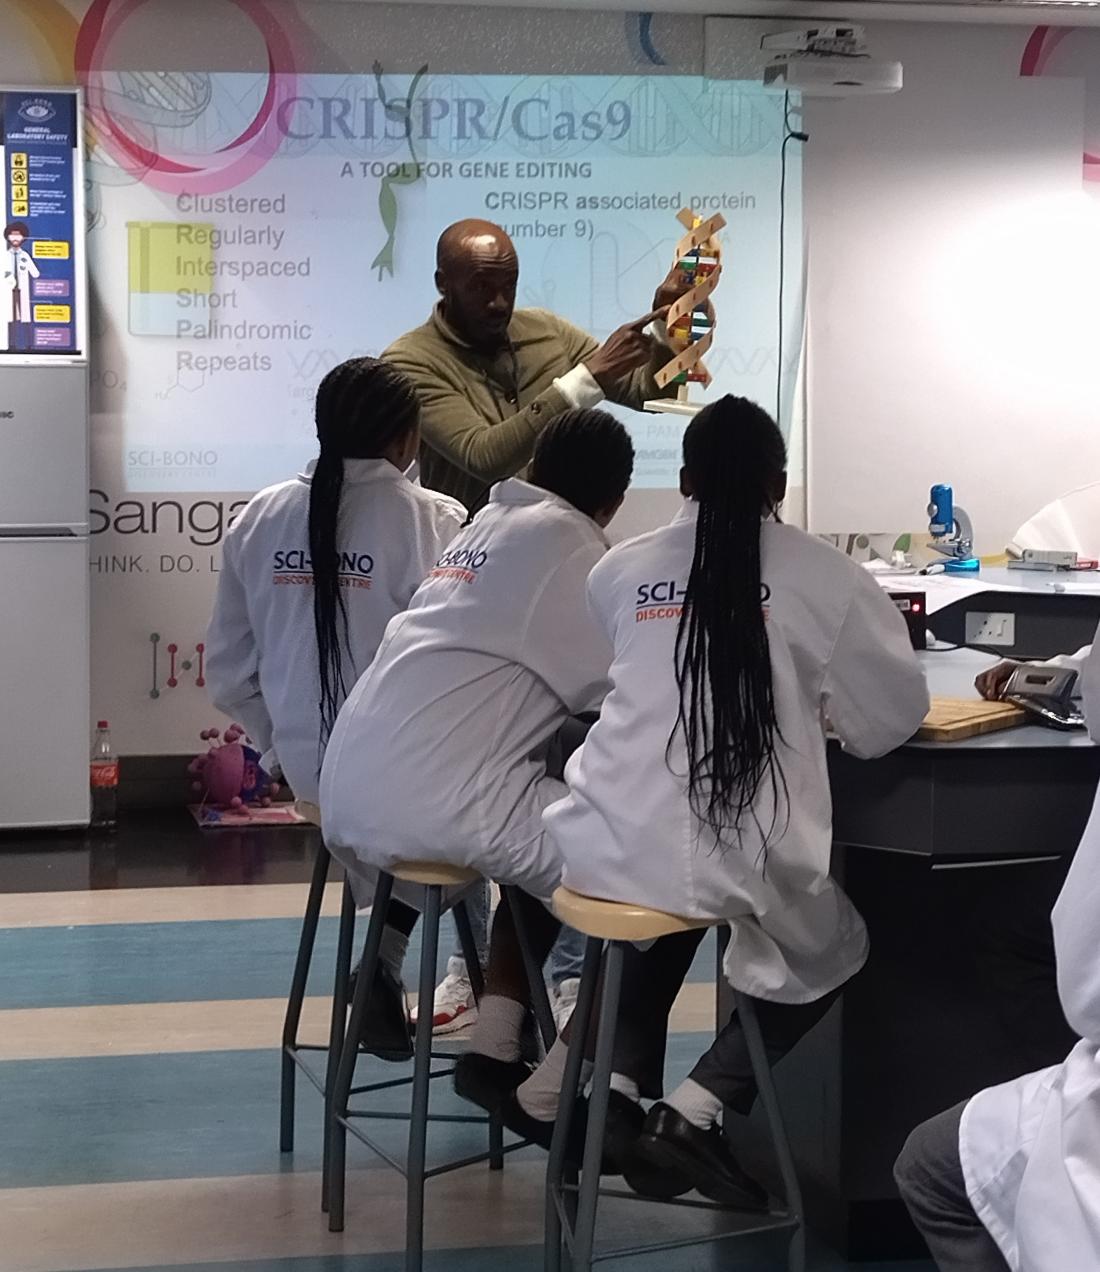 Mr Nyoni presents a model of DNA to students in labcoats. Behind him is a projection of a CRISPR/Cas9 powerpoint.